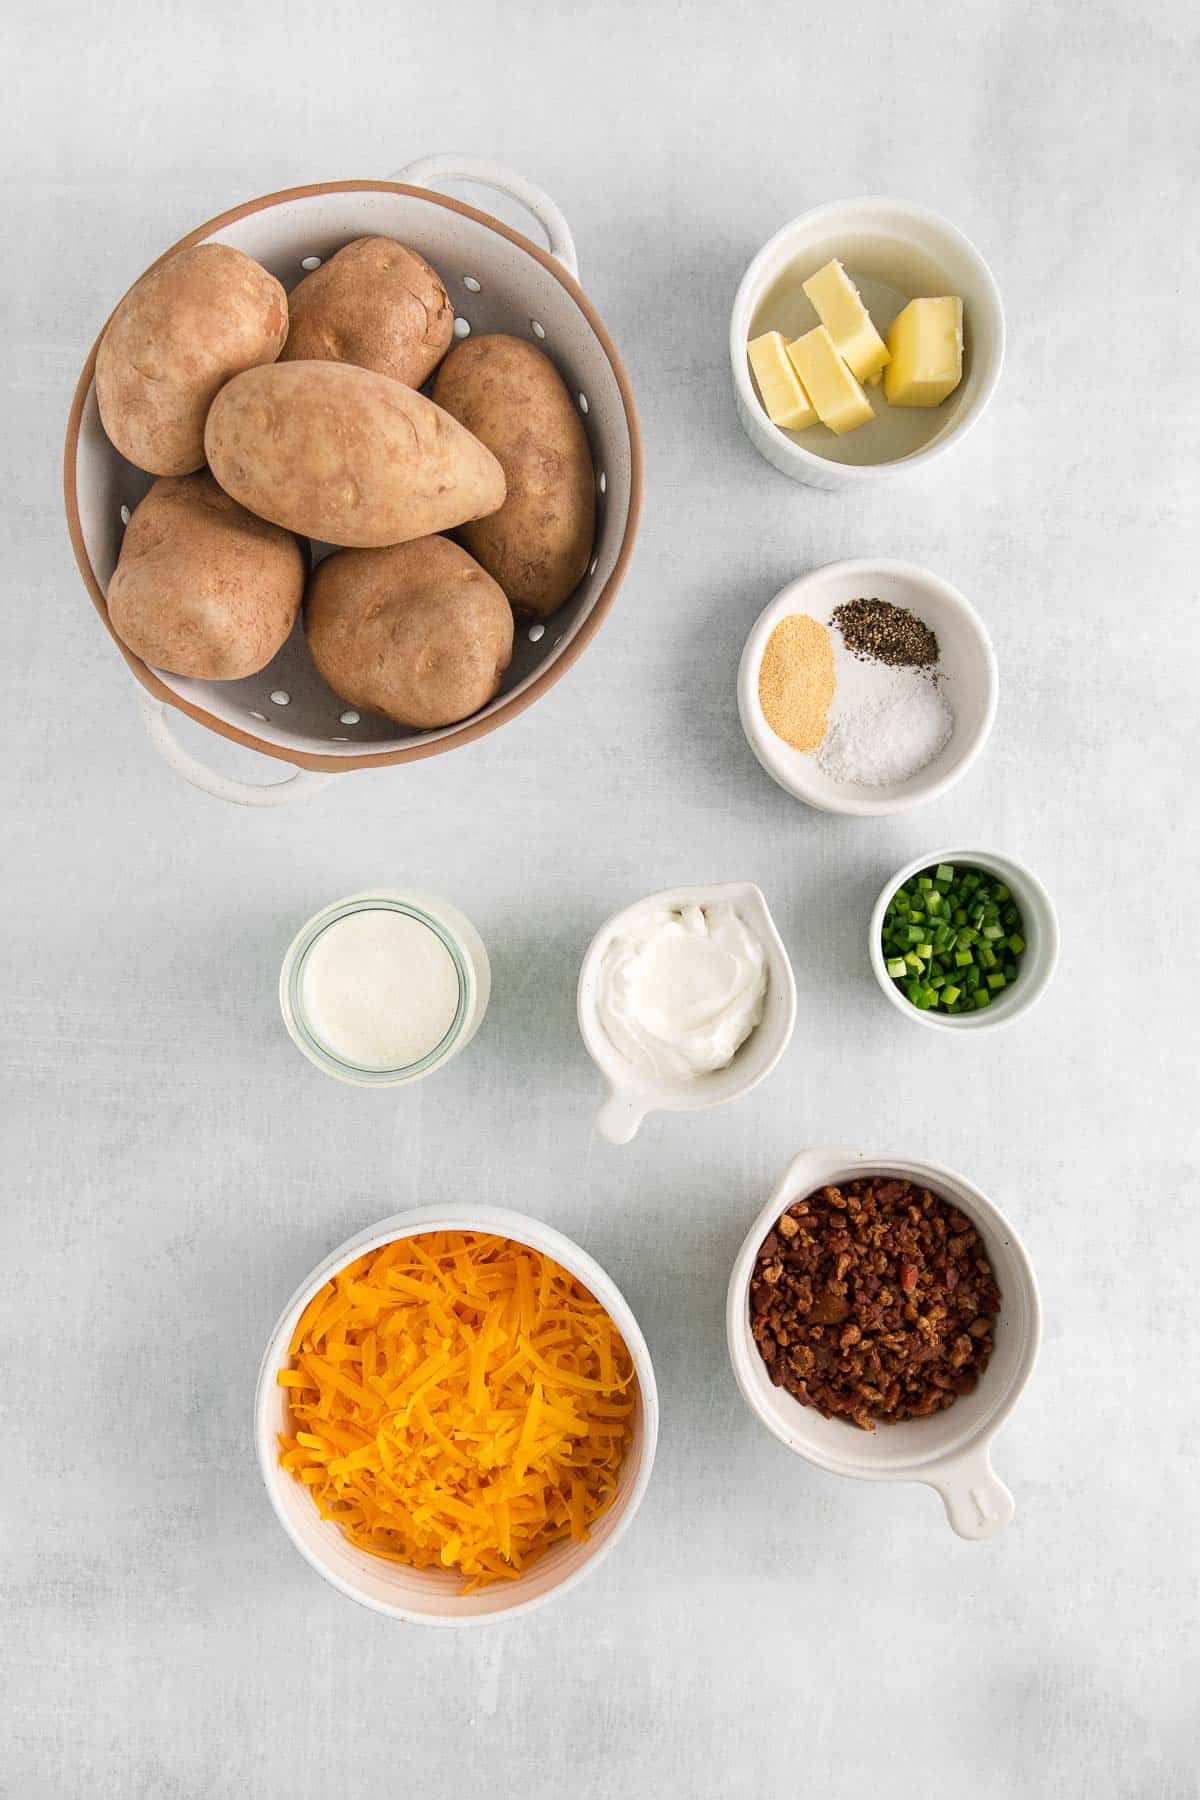 several bowls of ingredients for loaded potato casserole - russet potatoes, shredded cheese, bacon bits, butter, sour cream, scallions and spices.